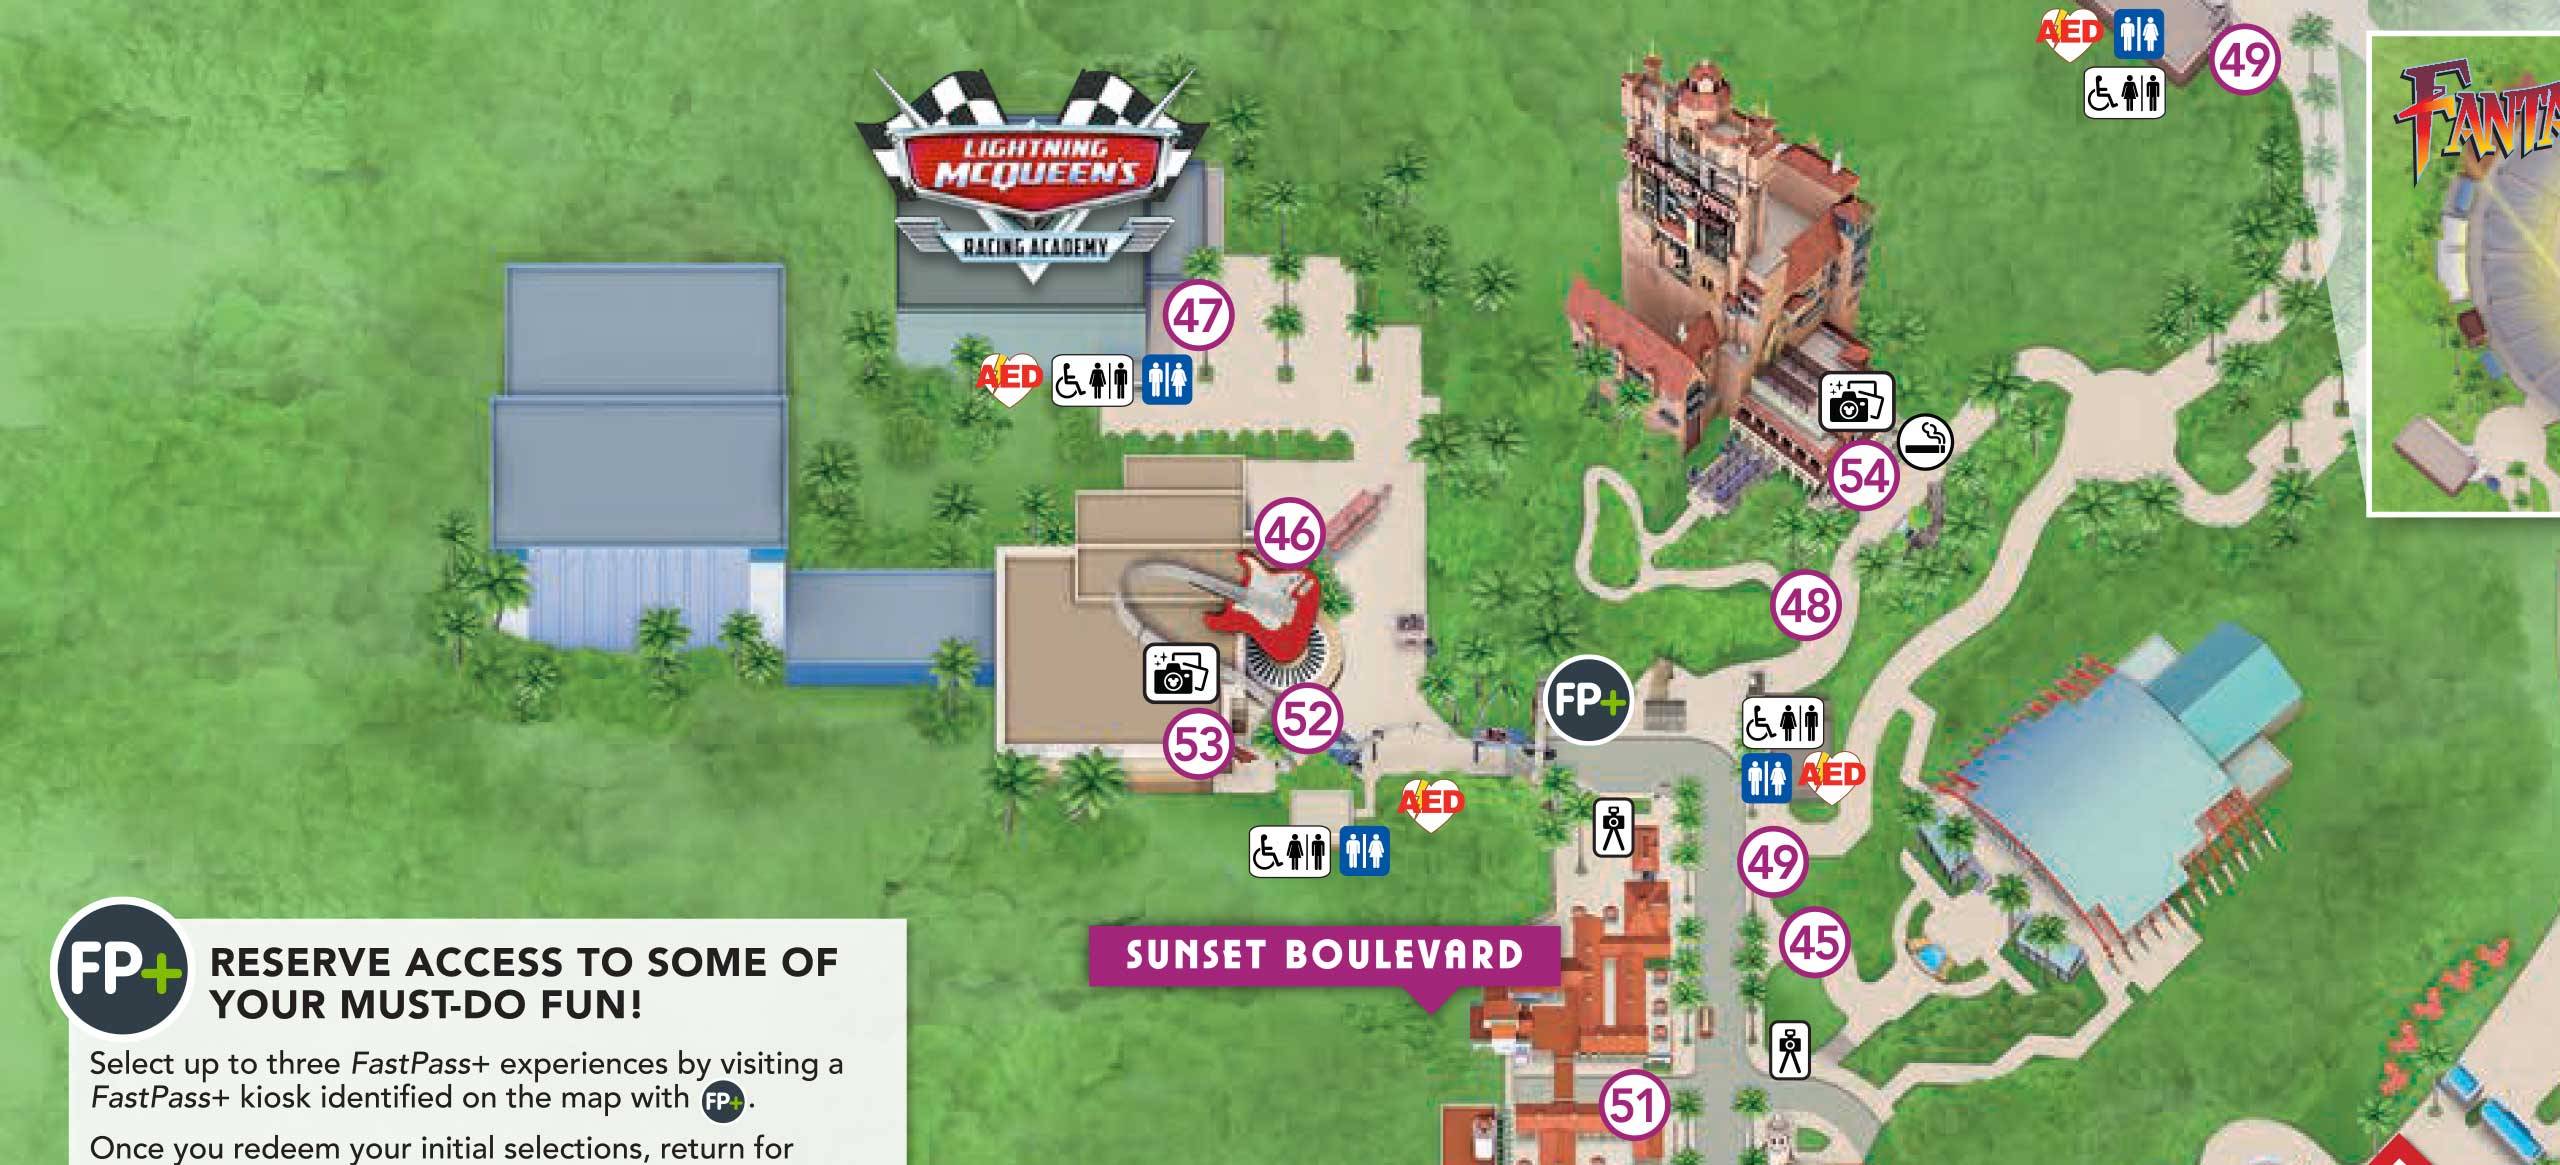 30th Anniversary Guide Map for Disney's Hollywood Studios